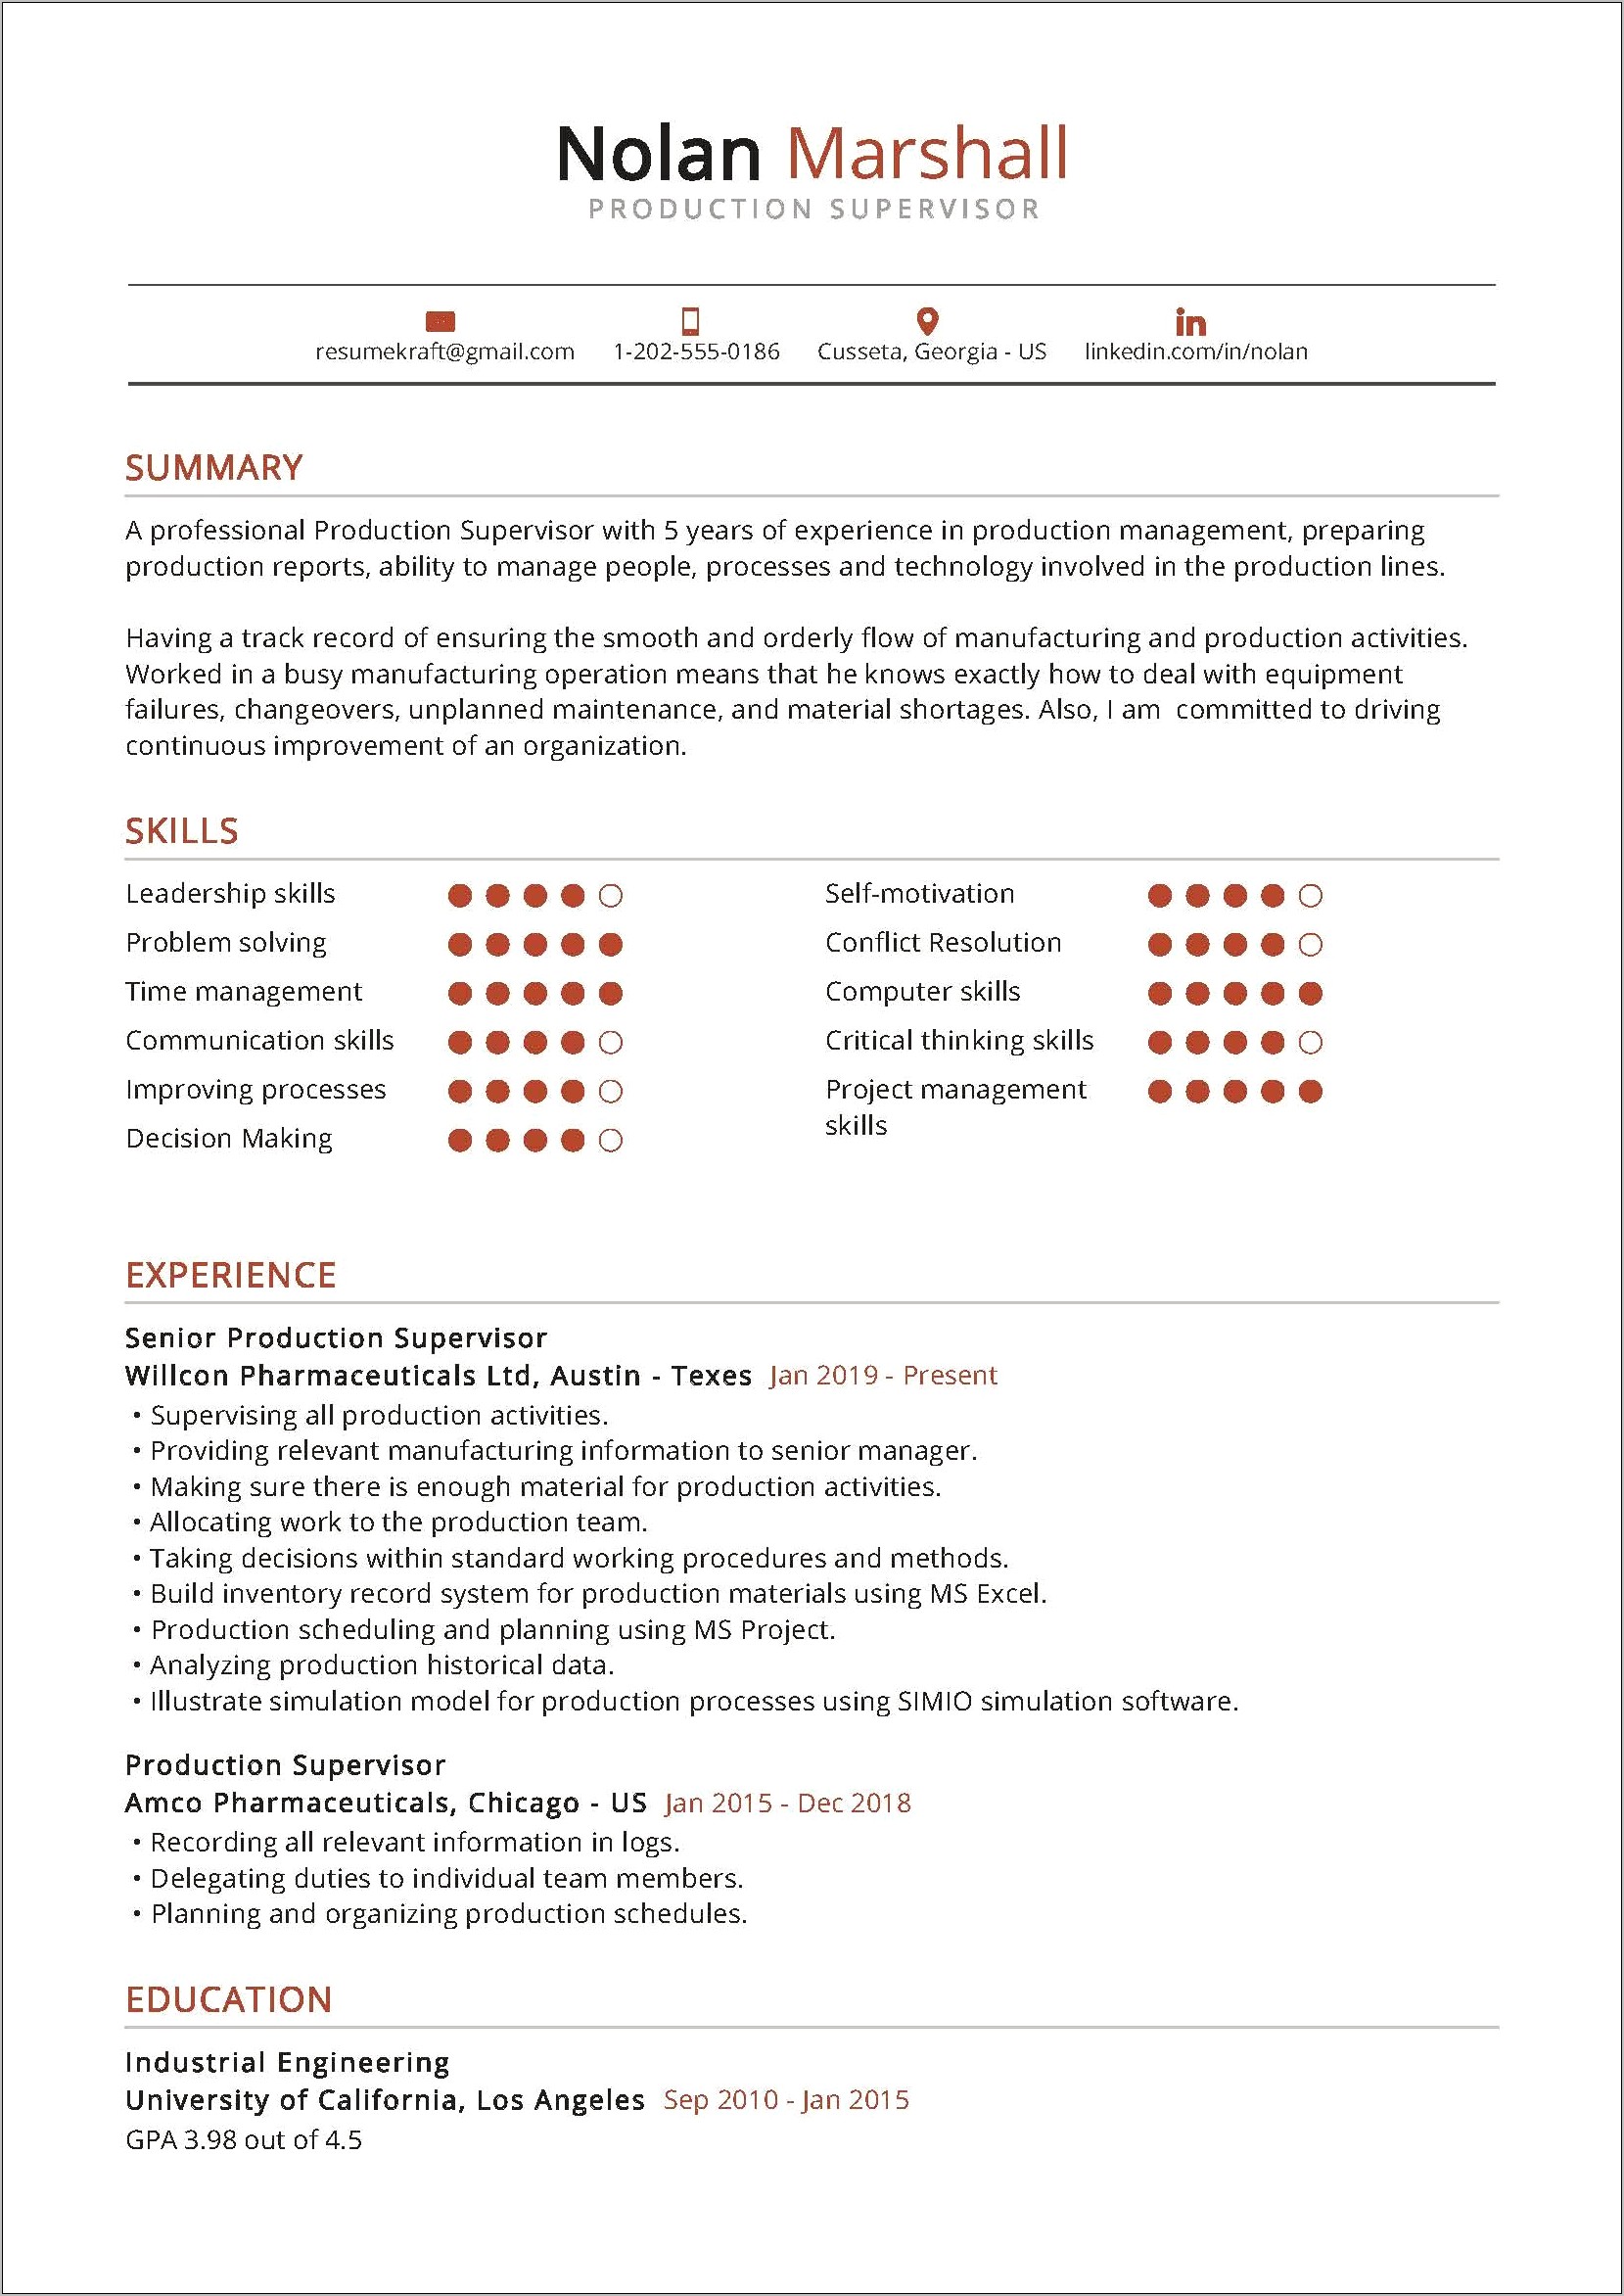 Sample Resume With Supervisor Experience